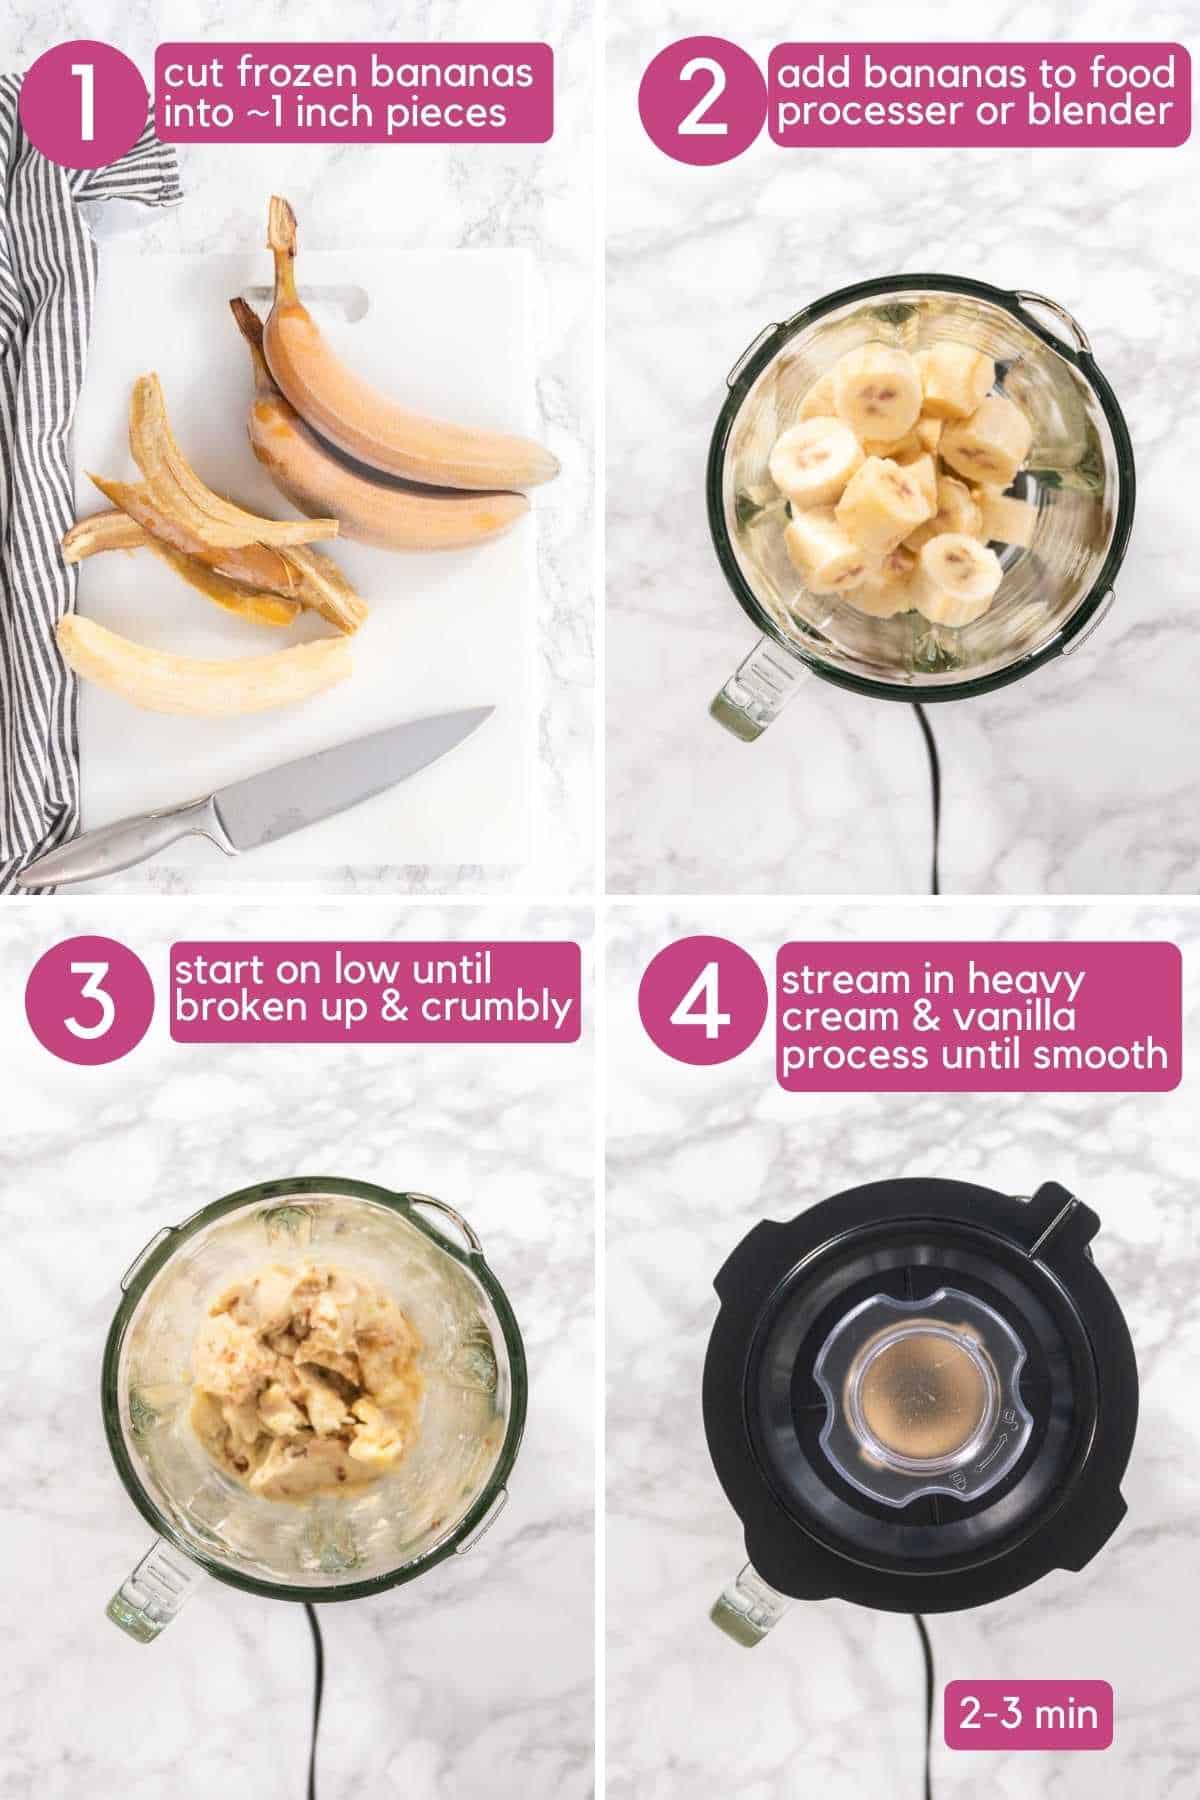 Cut up bananas, add to a food processer, and start on low until broken up and crumbly. Add heavy cream and vanilla for cookies and cream nice cream.